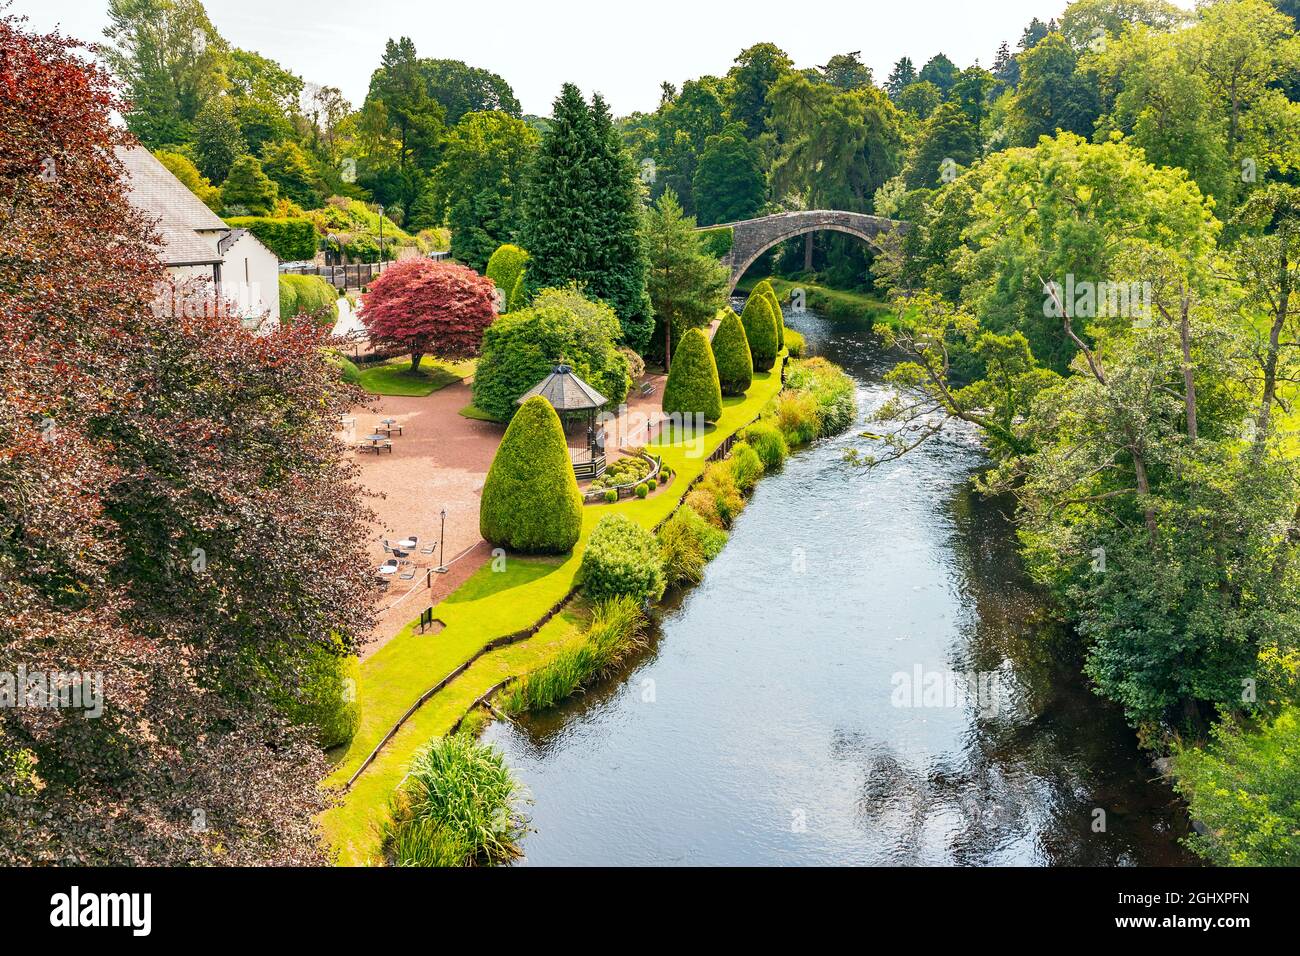 The Auld Brig o' Doon or Tam's Brig as mentioned in Tam O'Shanter, a poem by Robert Burns, Alloway, Ayr, Ayrshire, Scotland, UK Stock Photo